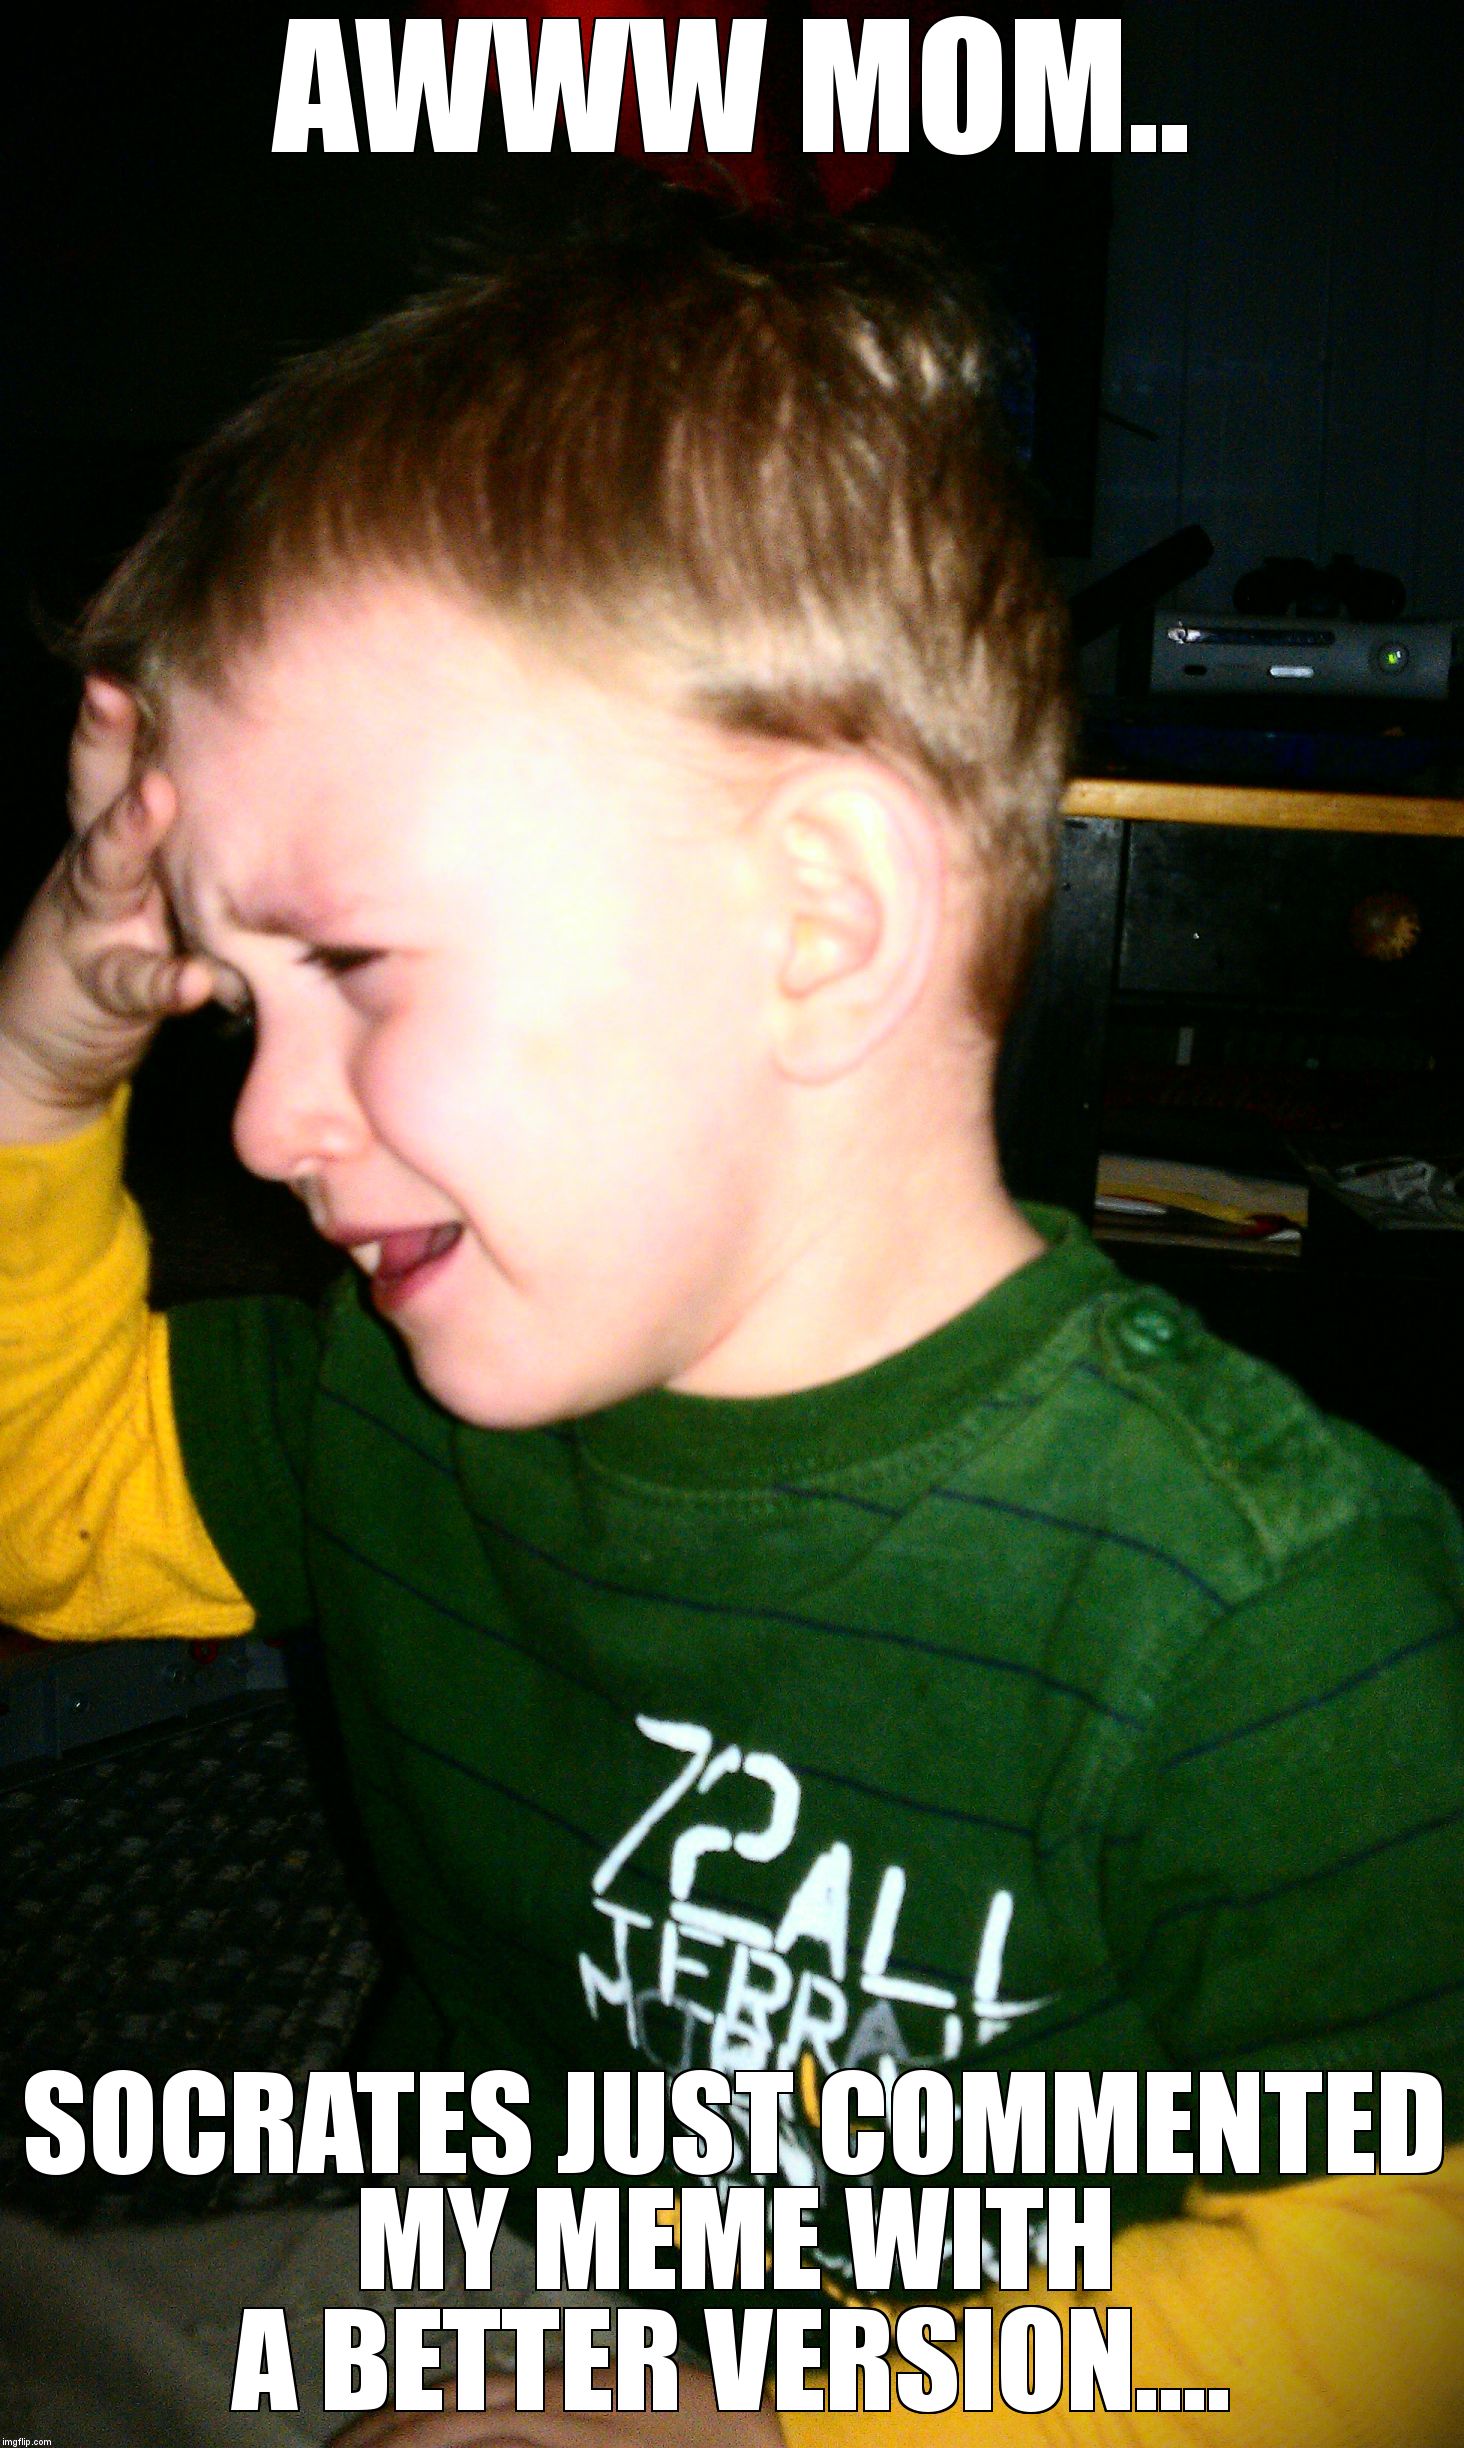 kid facepalm | AWWW MOM.. SOCRATES JUST COMMENTED MY MEME WITH A BETTER VERSION.... | image tagged in kid facepalm | made w/ Imgflip meme maker